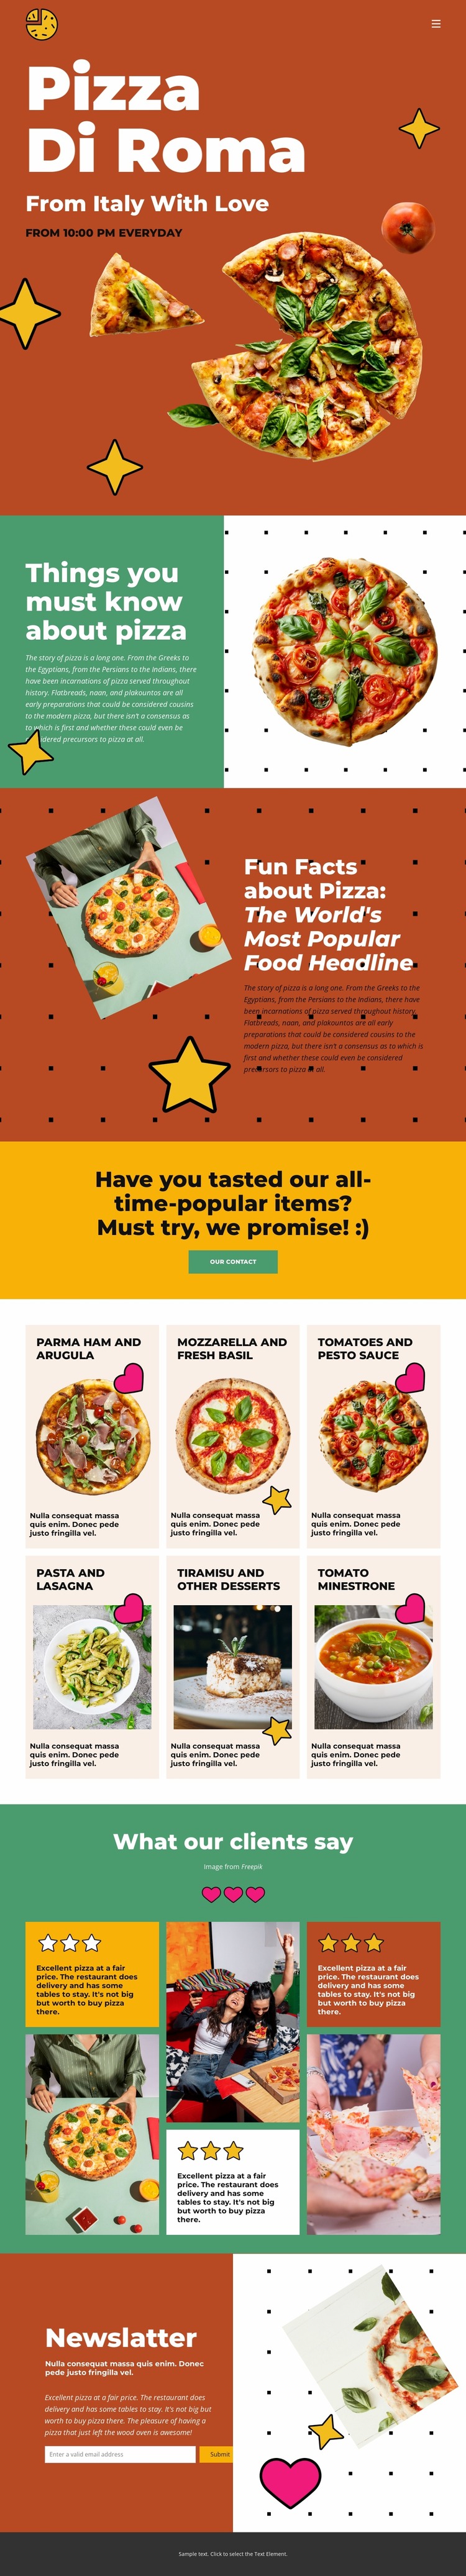 Things you must know about pizza Html Website Builder